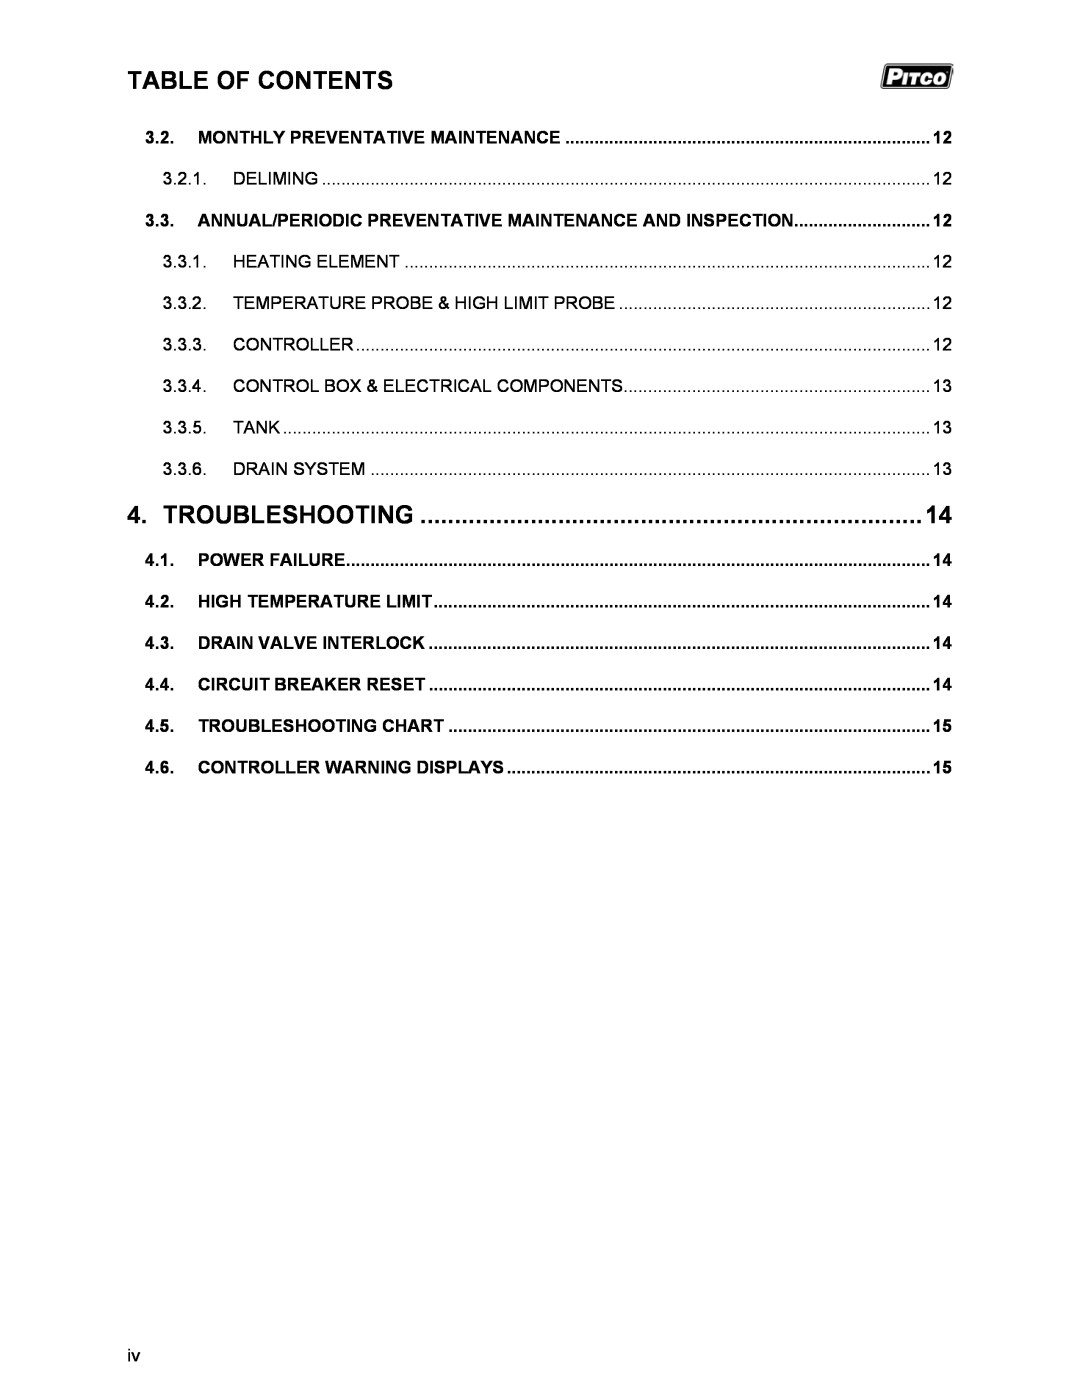 Pitco Frialator RSCPE14 operation manual Table Of Contents, Troubleshooting 